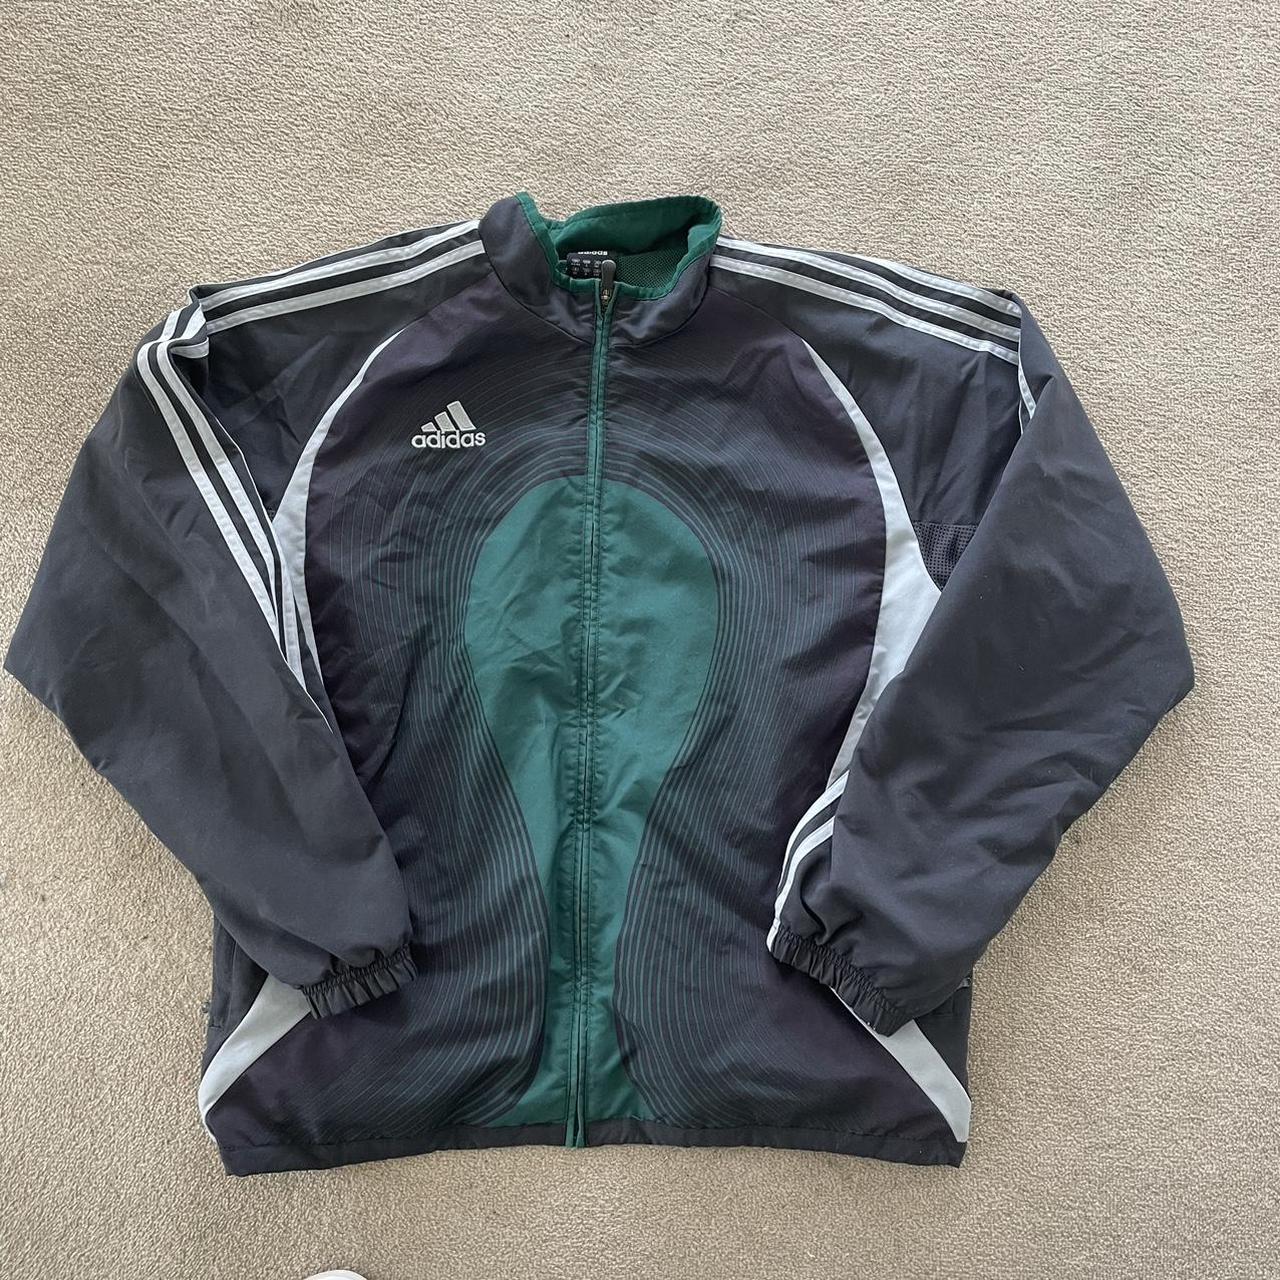 Vintage adidas referee jacket from 06 World Cup I... - Depop